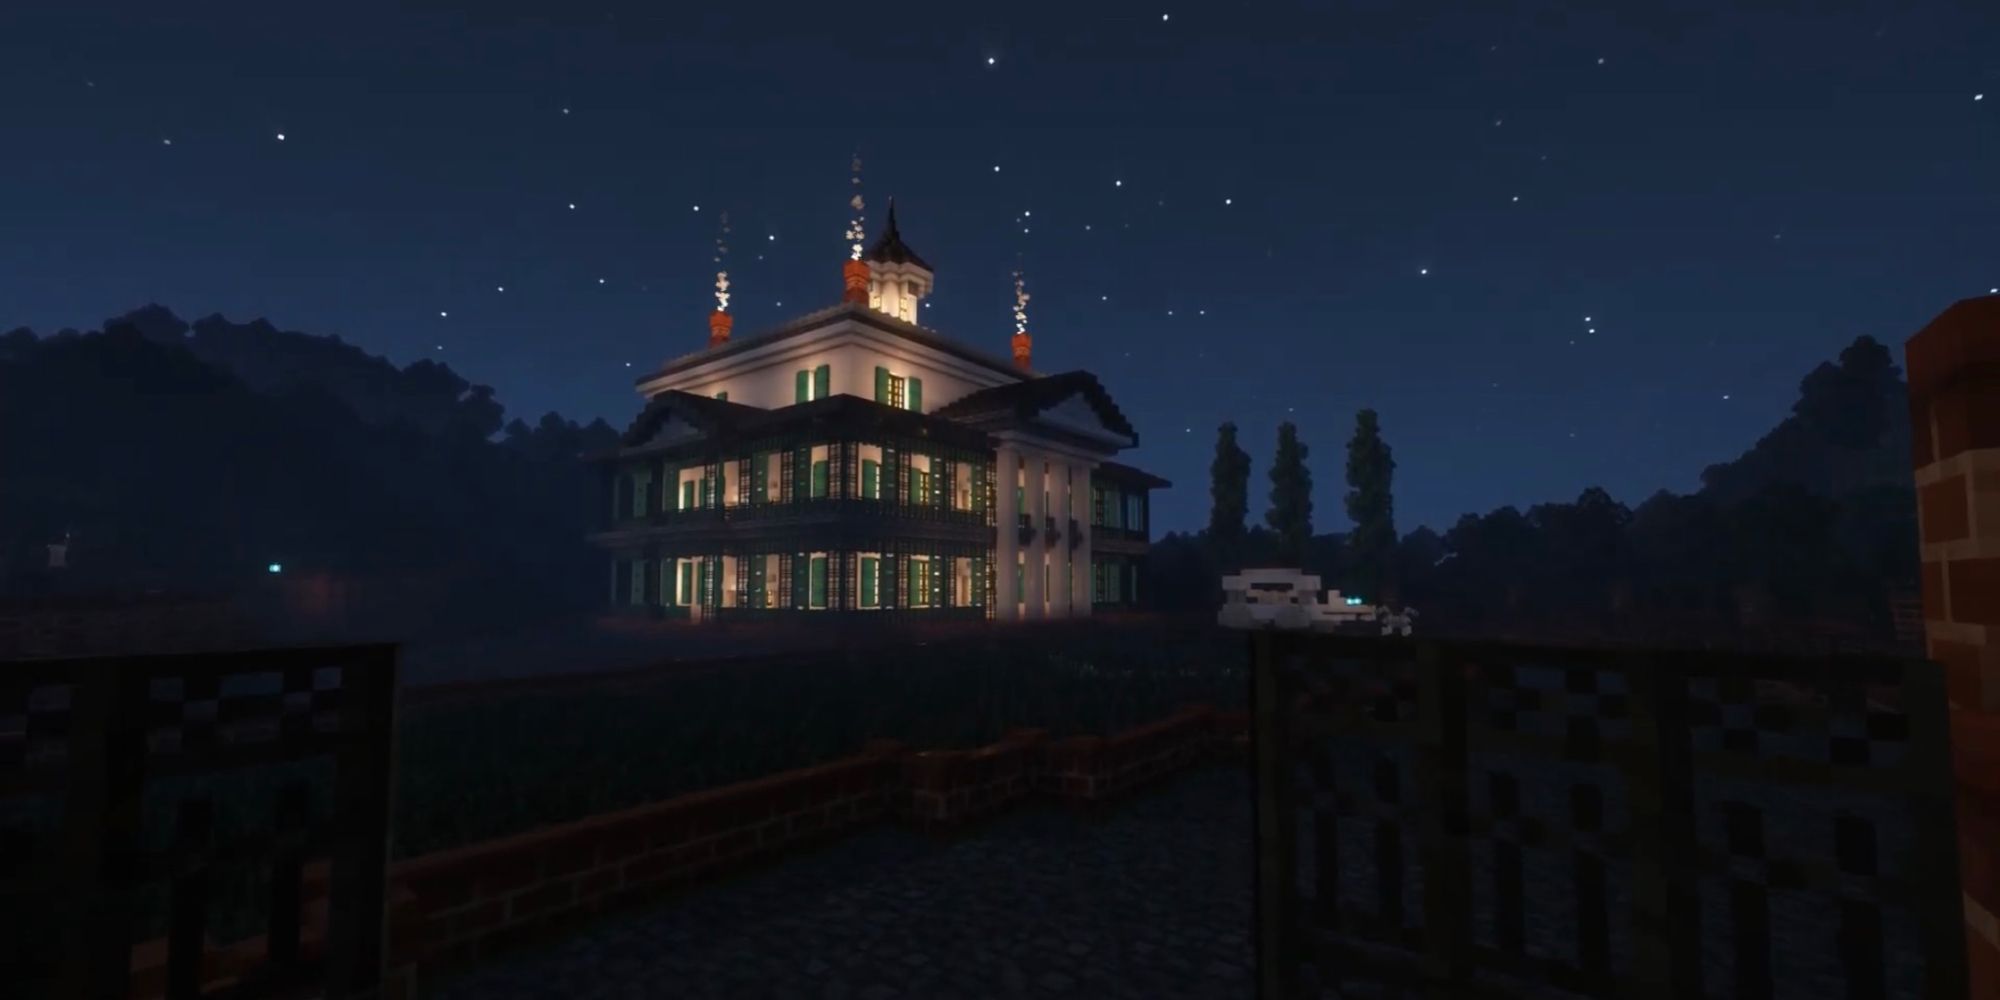 An image from Minecraft of a haunted mansion, the house form the movie titled The Haunted Mansion.